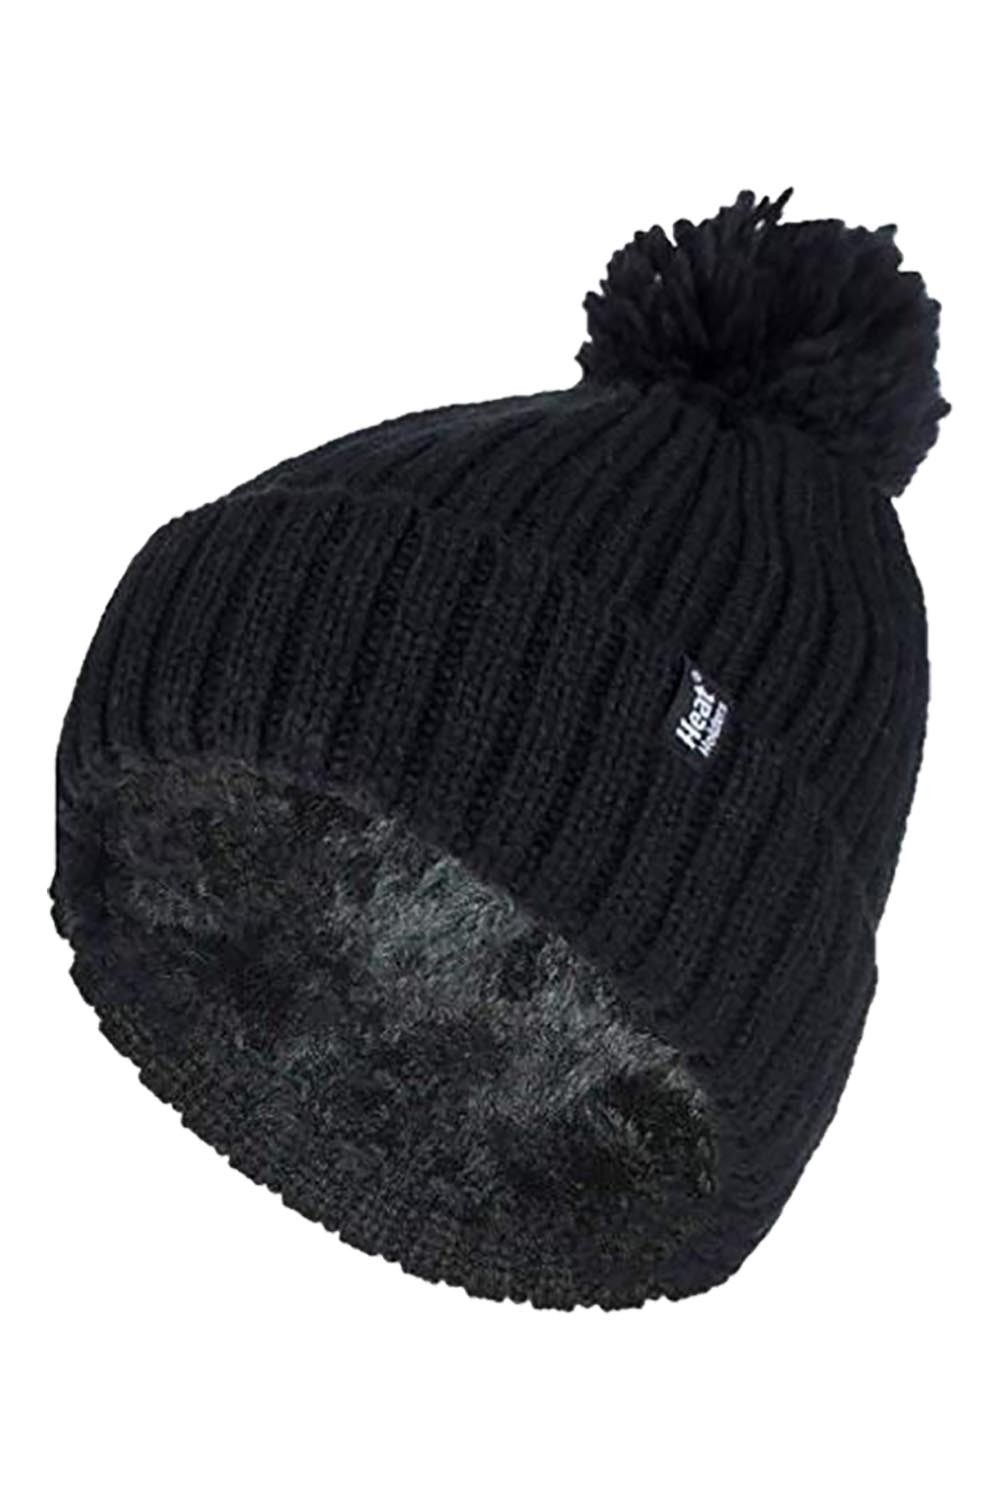 Womens Thermal Winter Bobble Hat With Pom Pom -